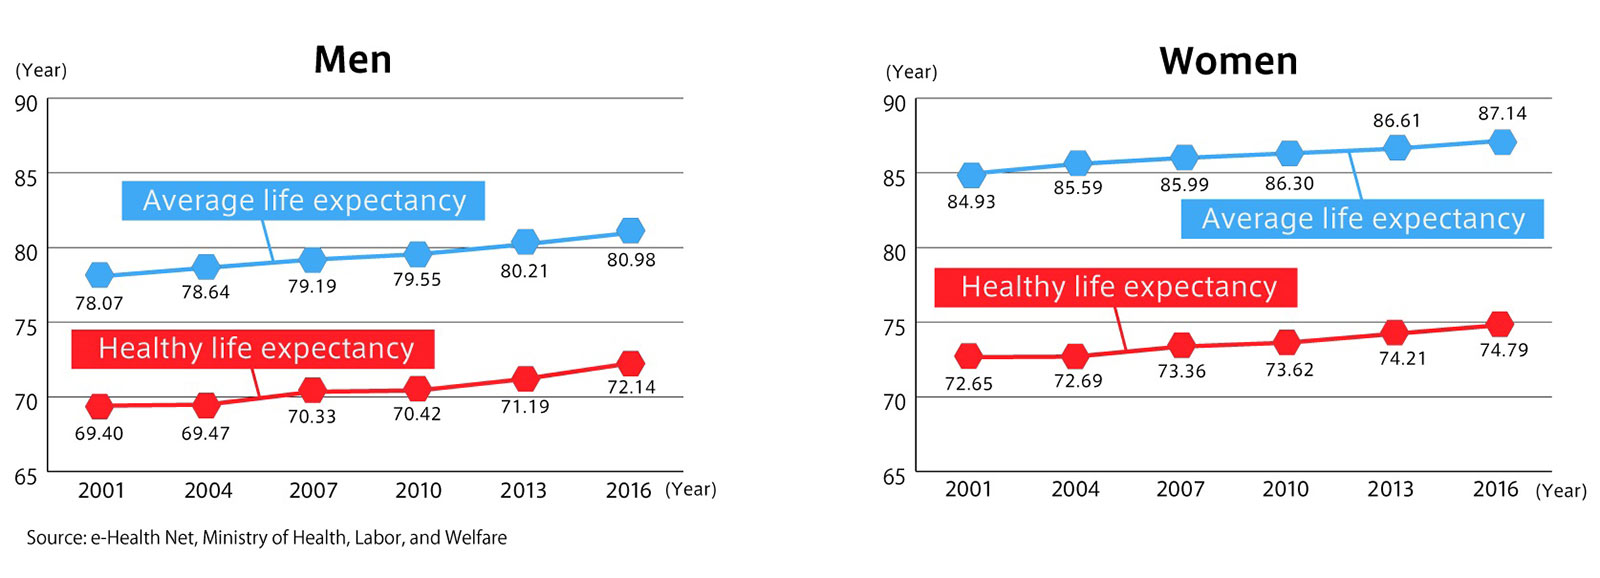 Figure 1. Average Life Expectancy and Healthy Life Expectancy